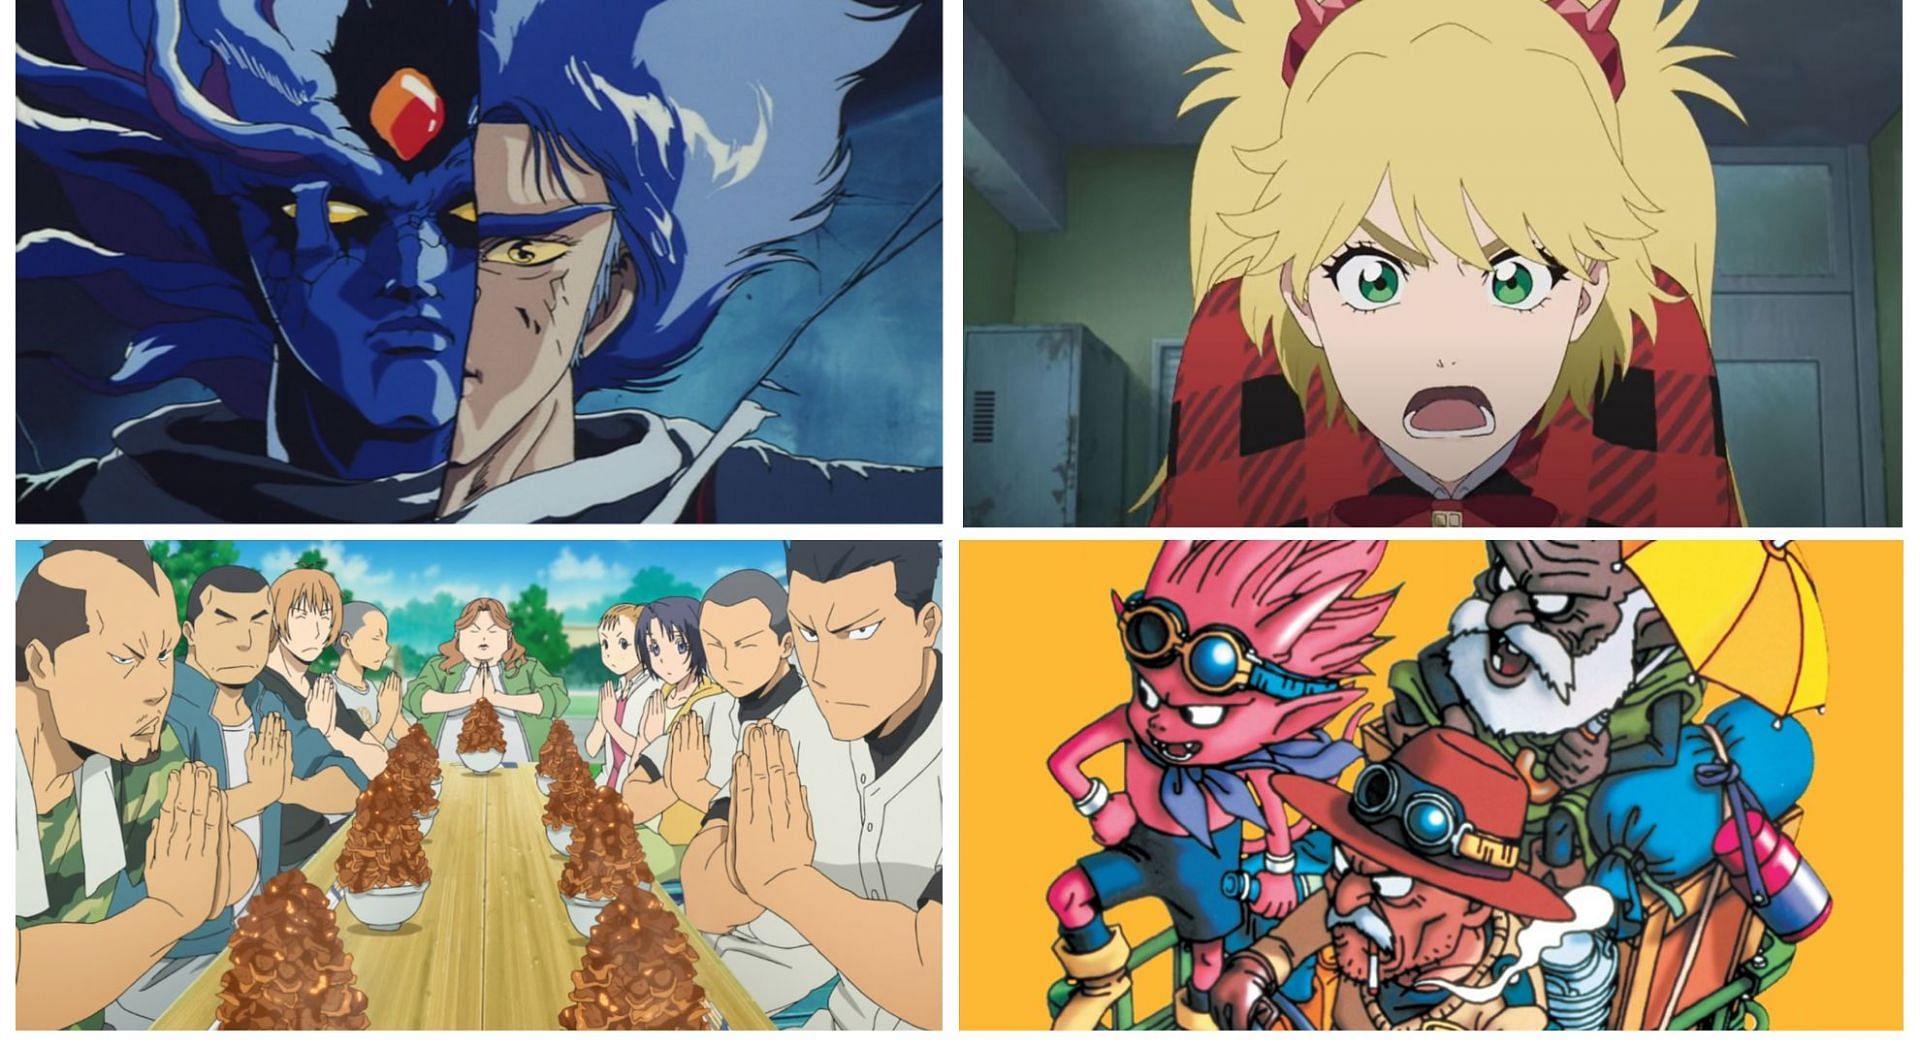 10 underrated Shonen anime and manga by famous creators